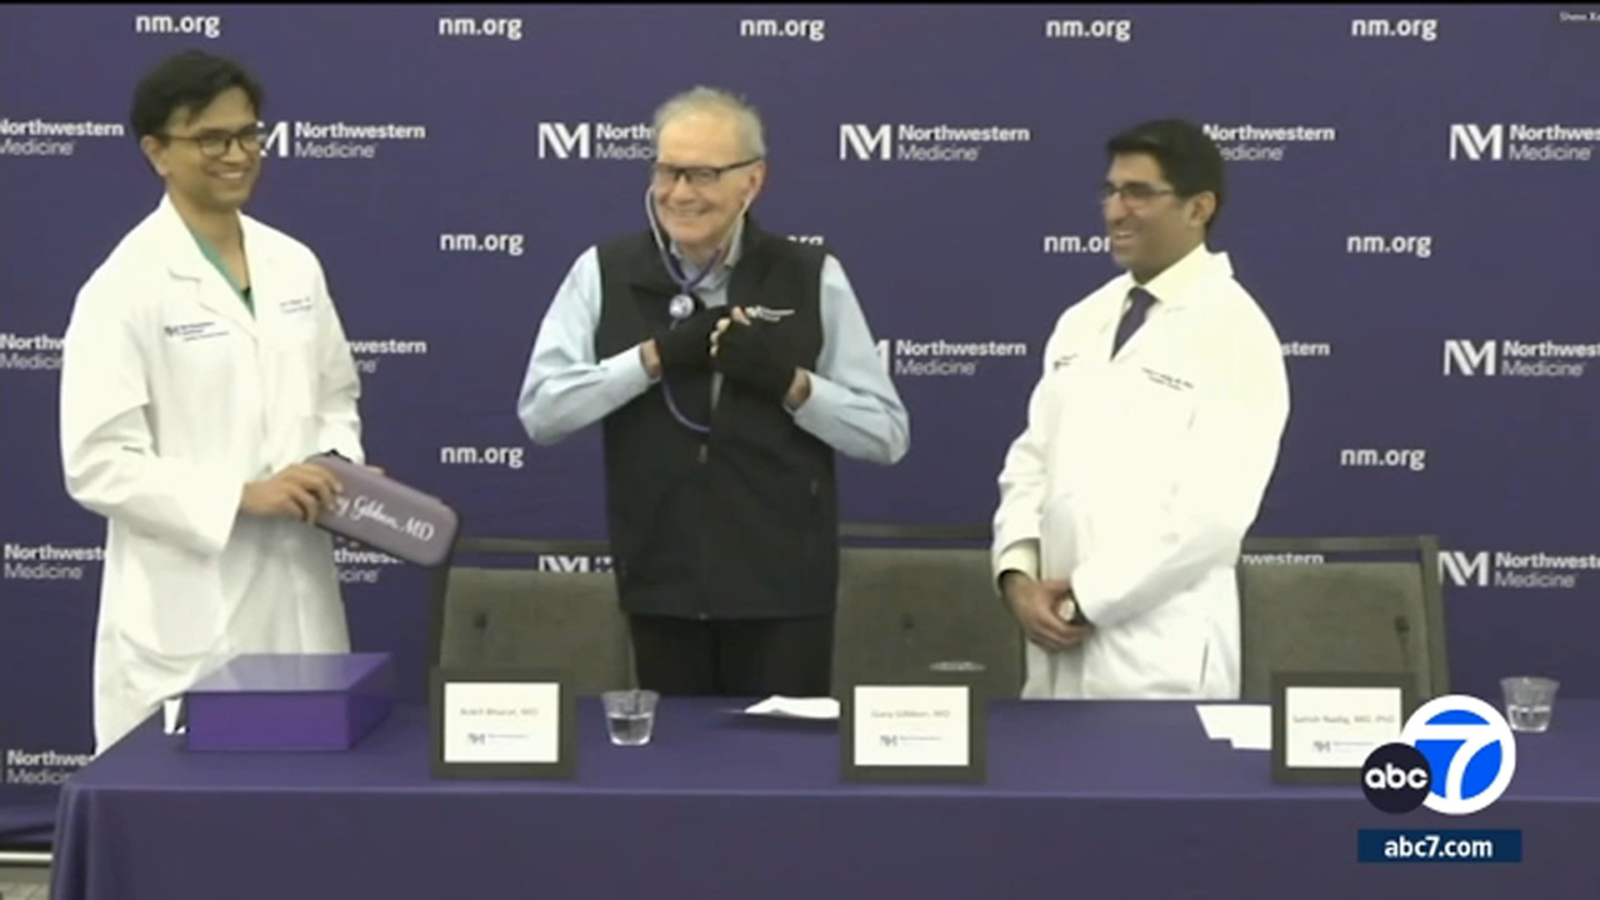 Santa Monica doctor doing well after unprecedented liver, double-lung transplant from Northwestern Medicine in Chicago [Video]